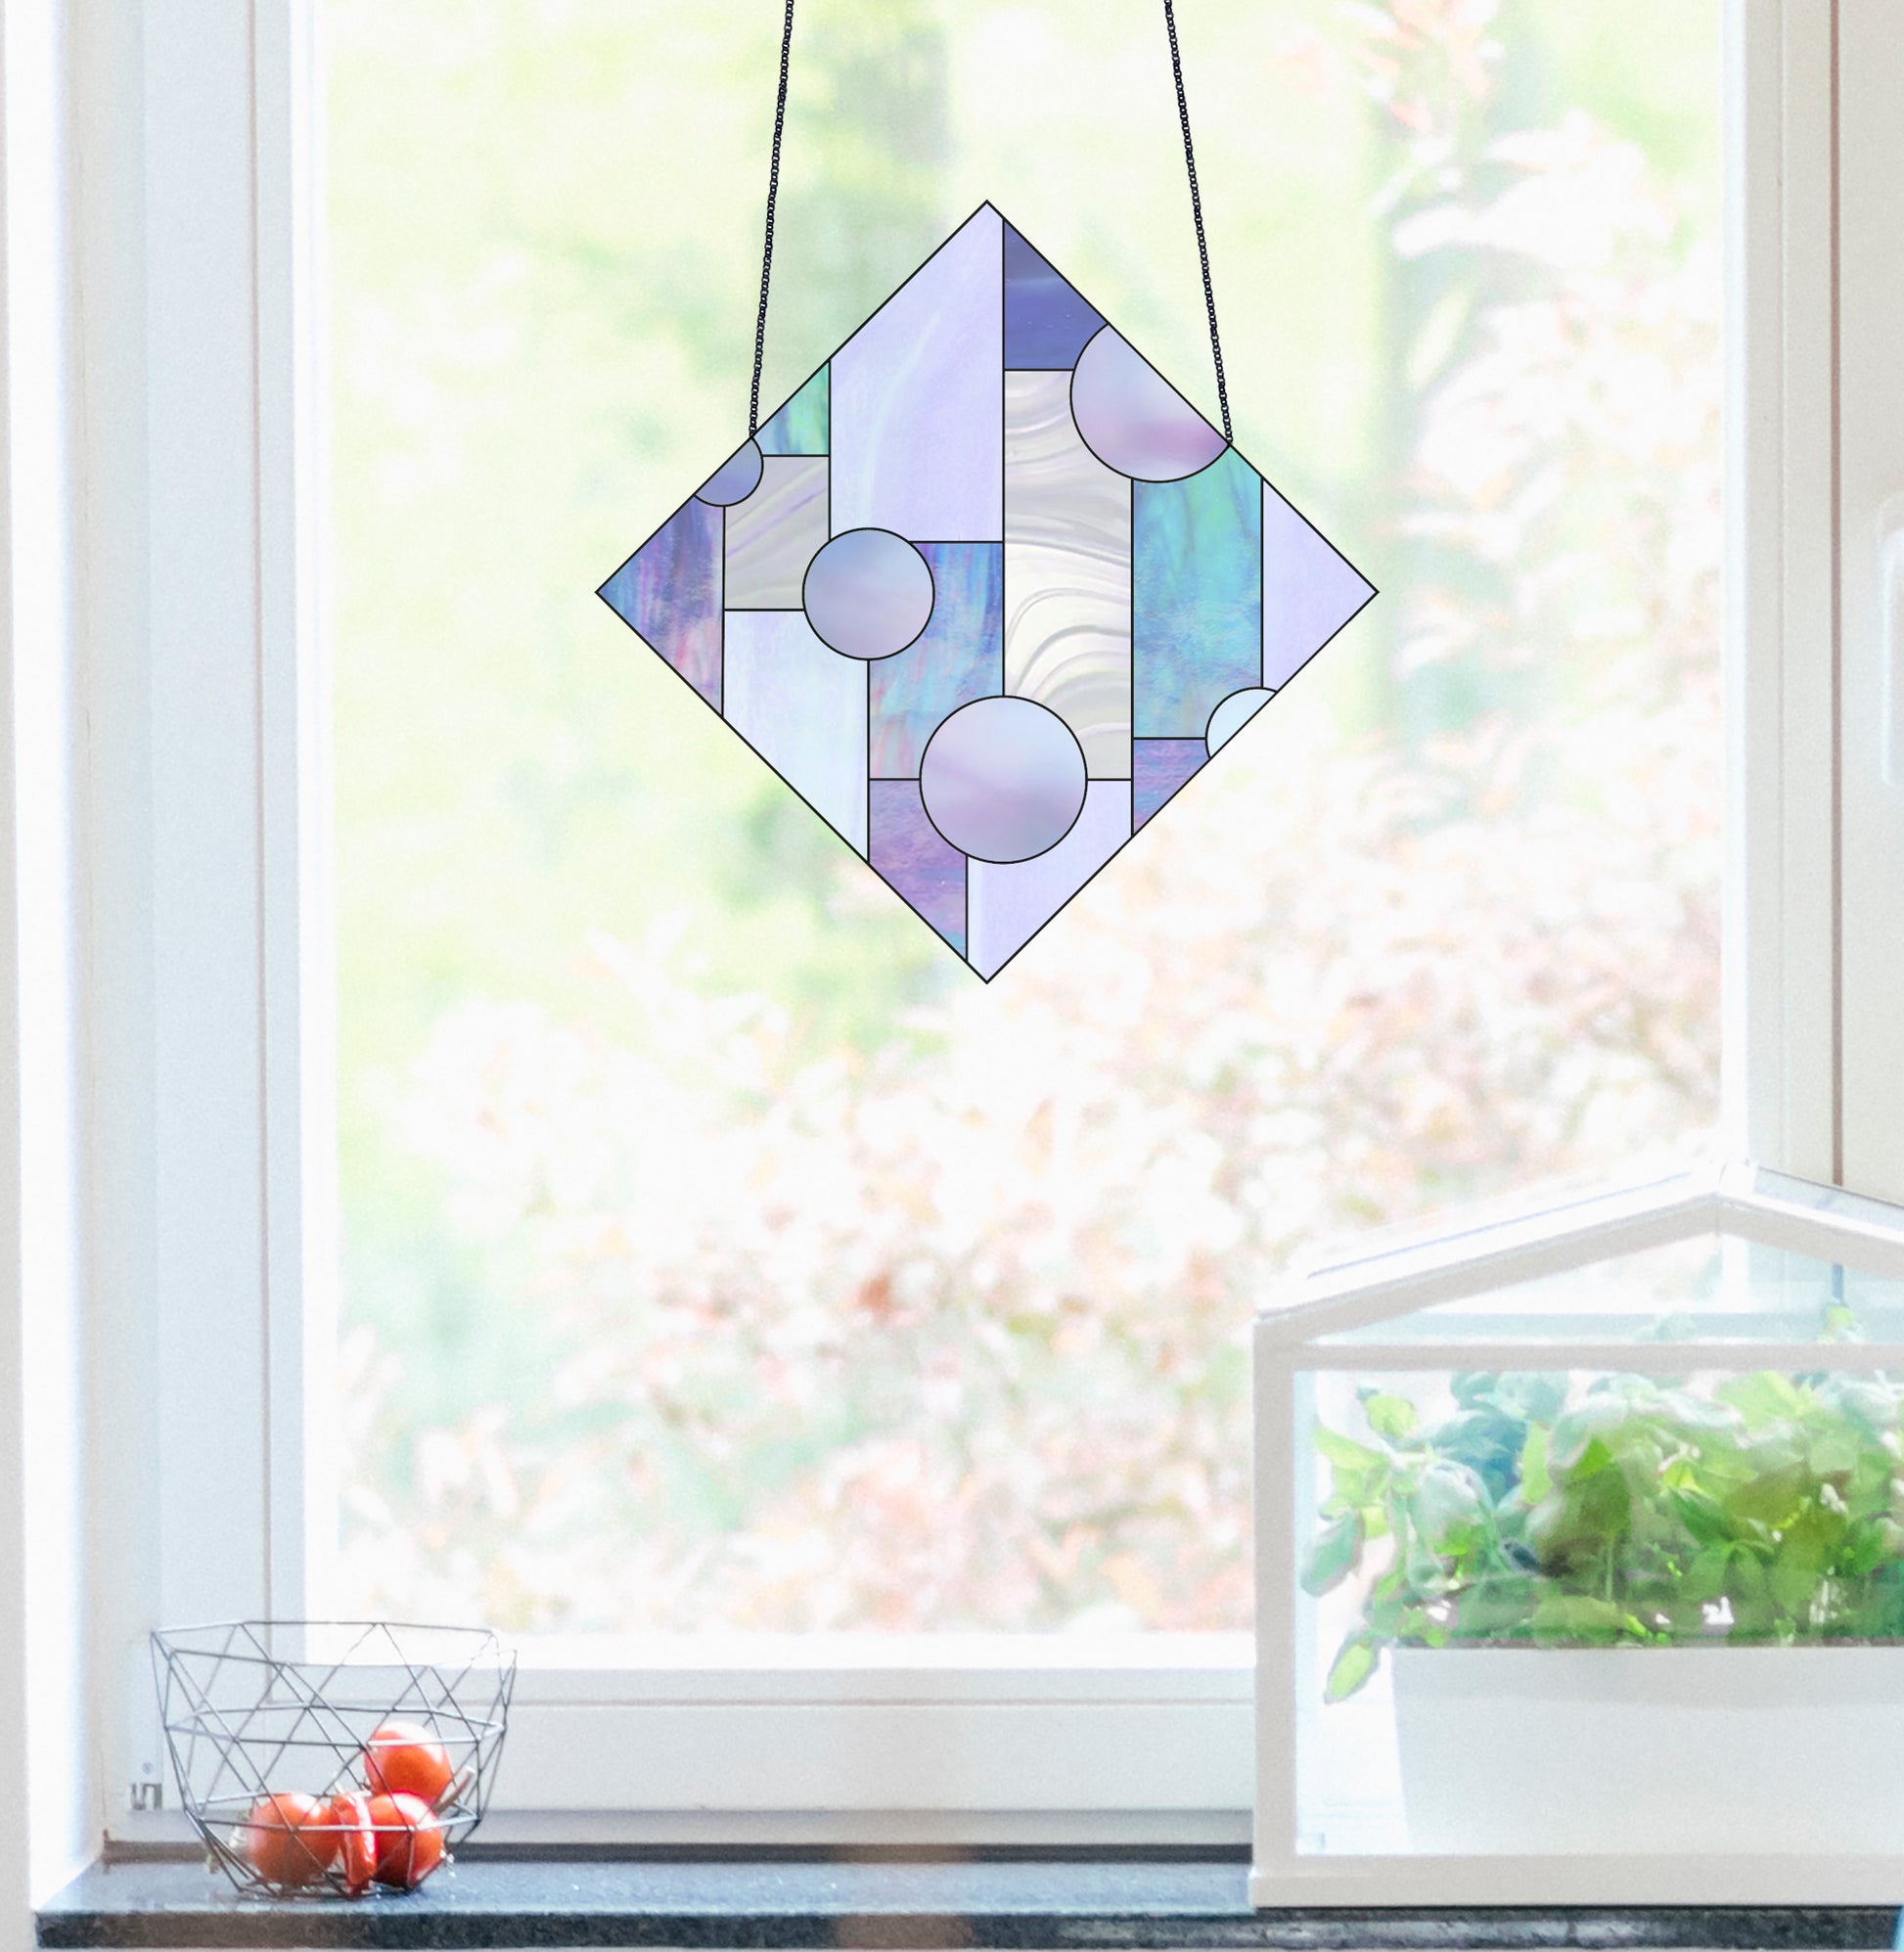 Stained Glass Patterns - The Glass Creative